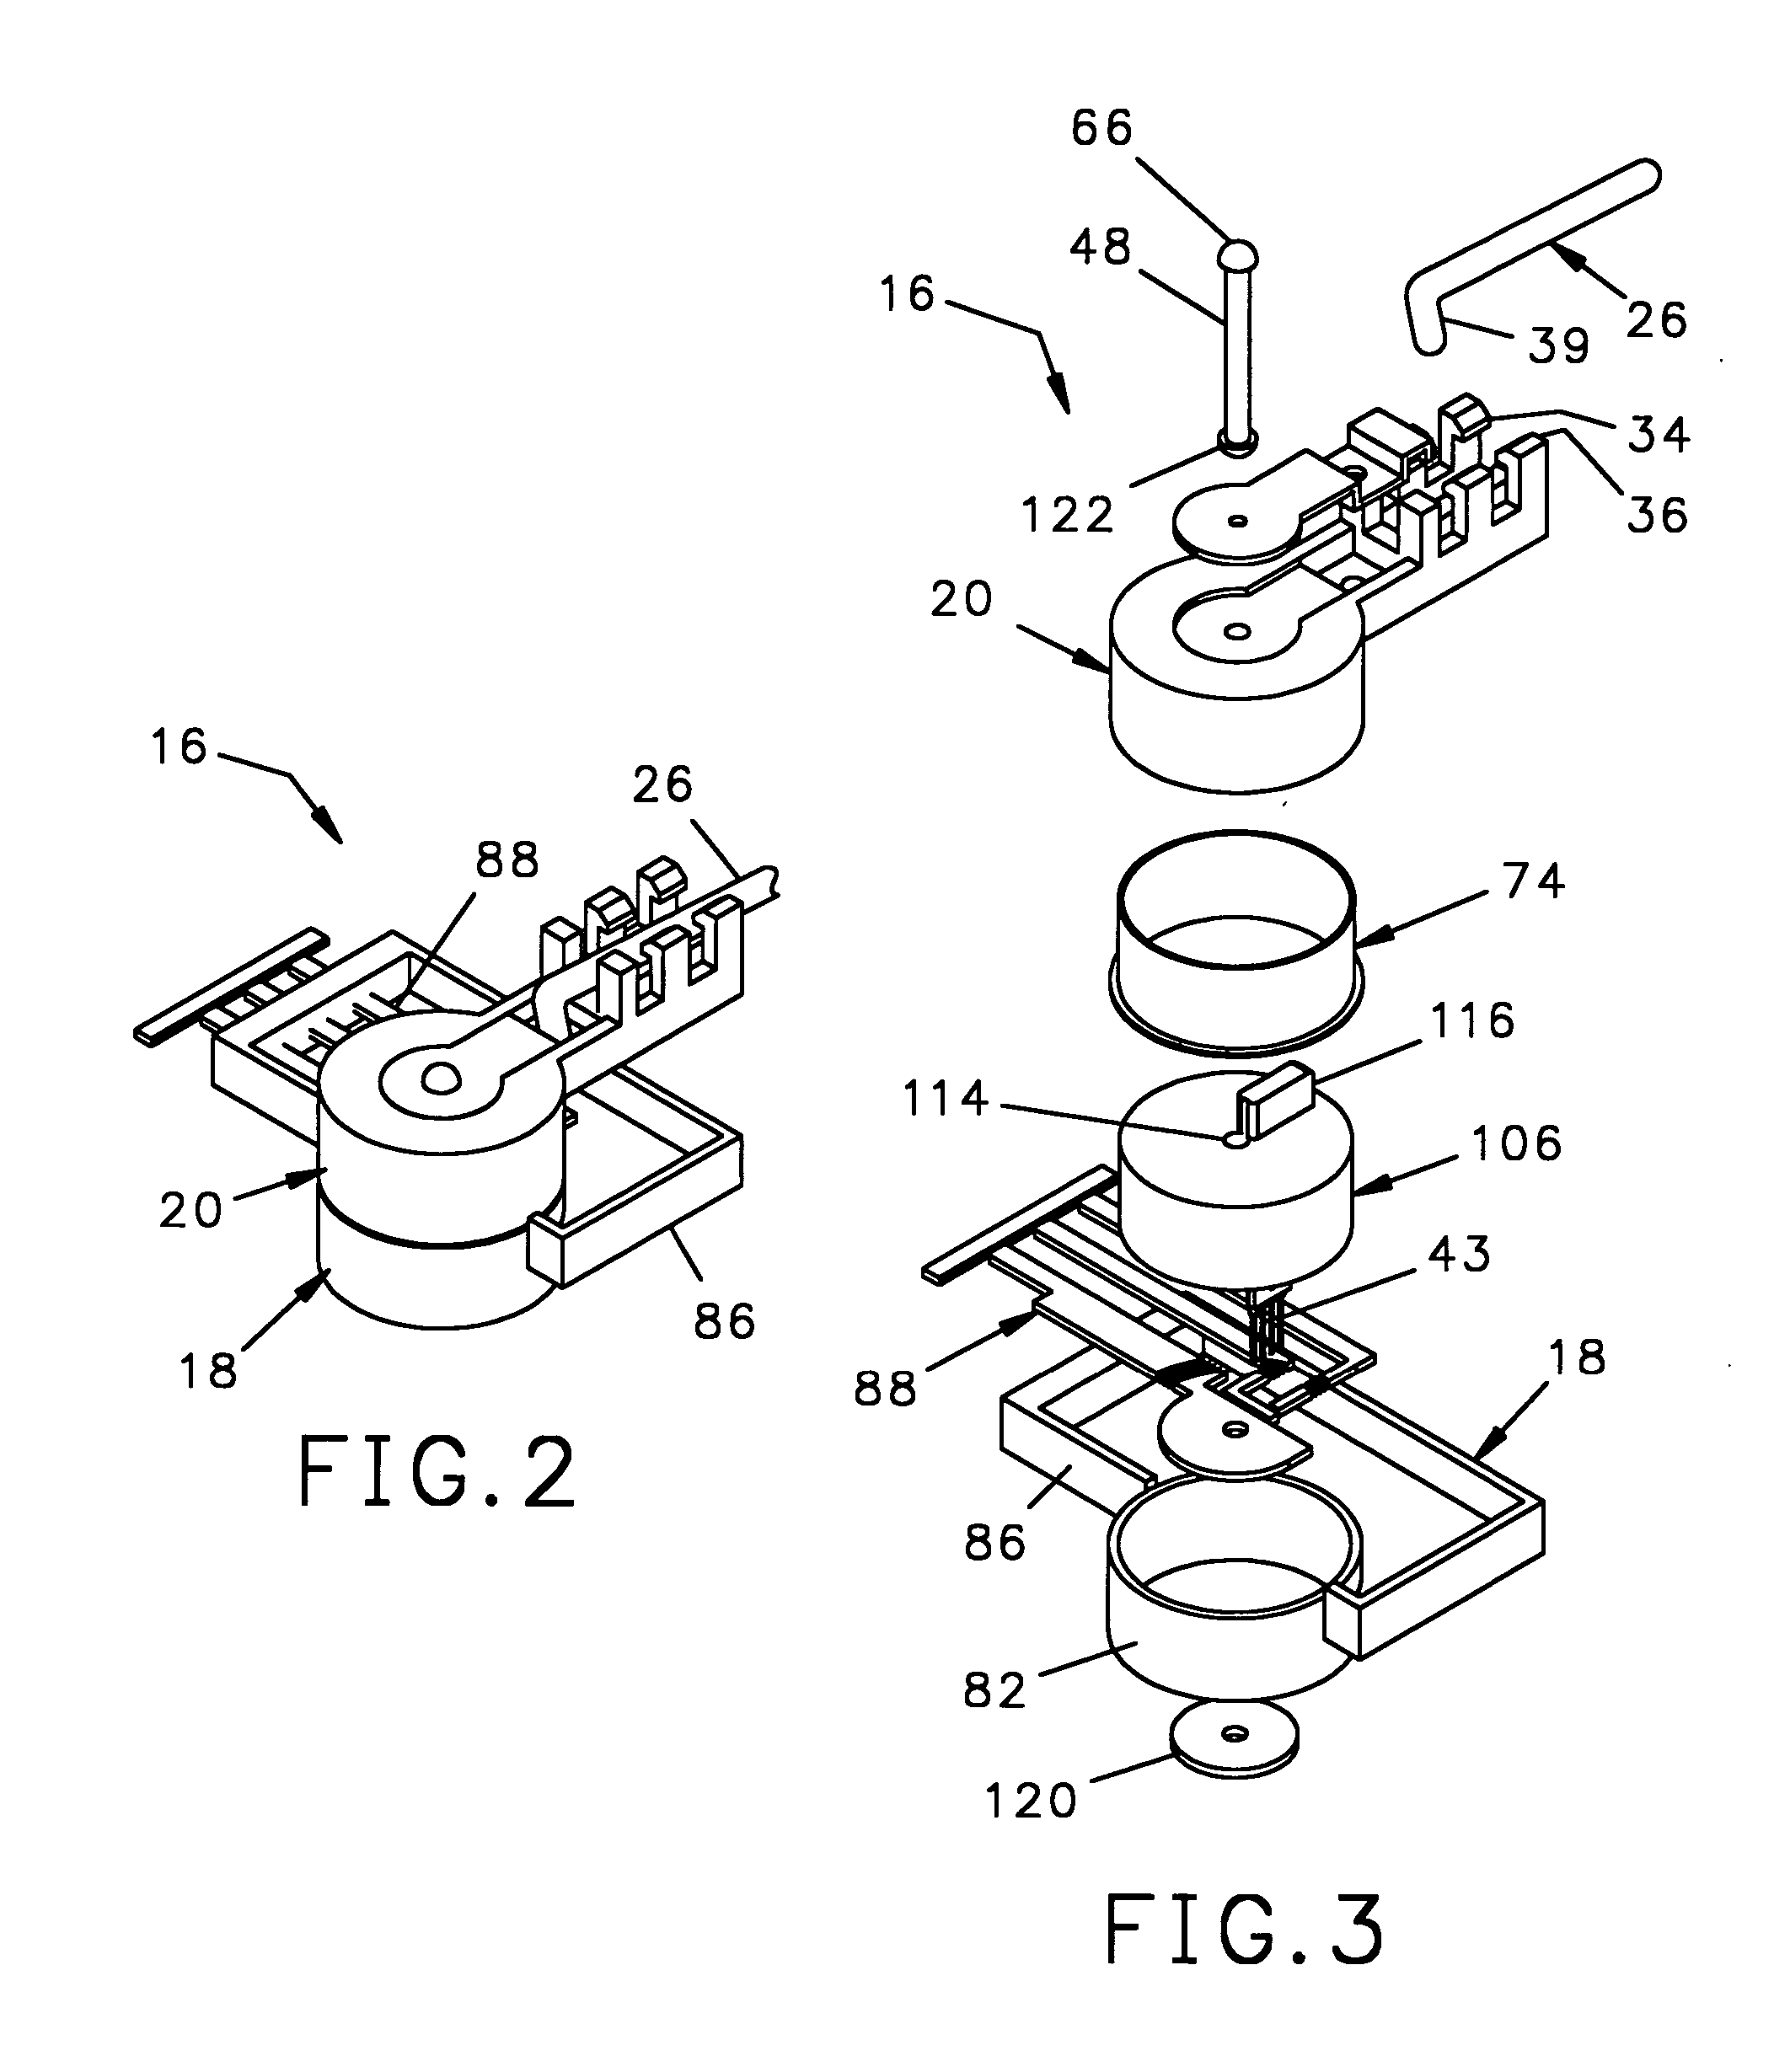 Device employing magnetic flux to measure the level of fluid in a tank